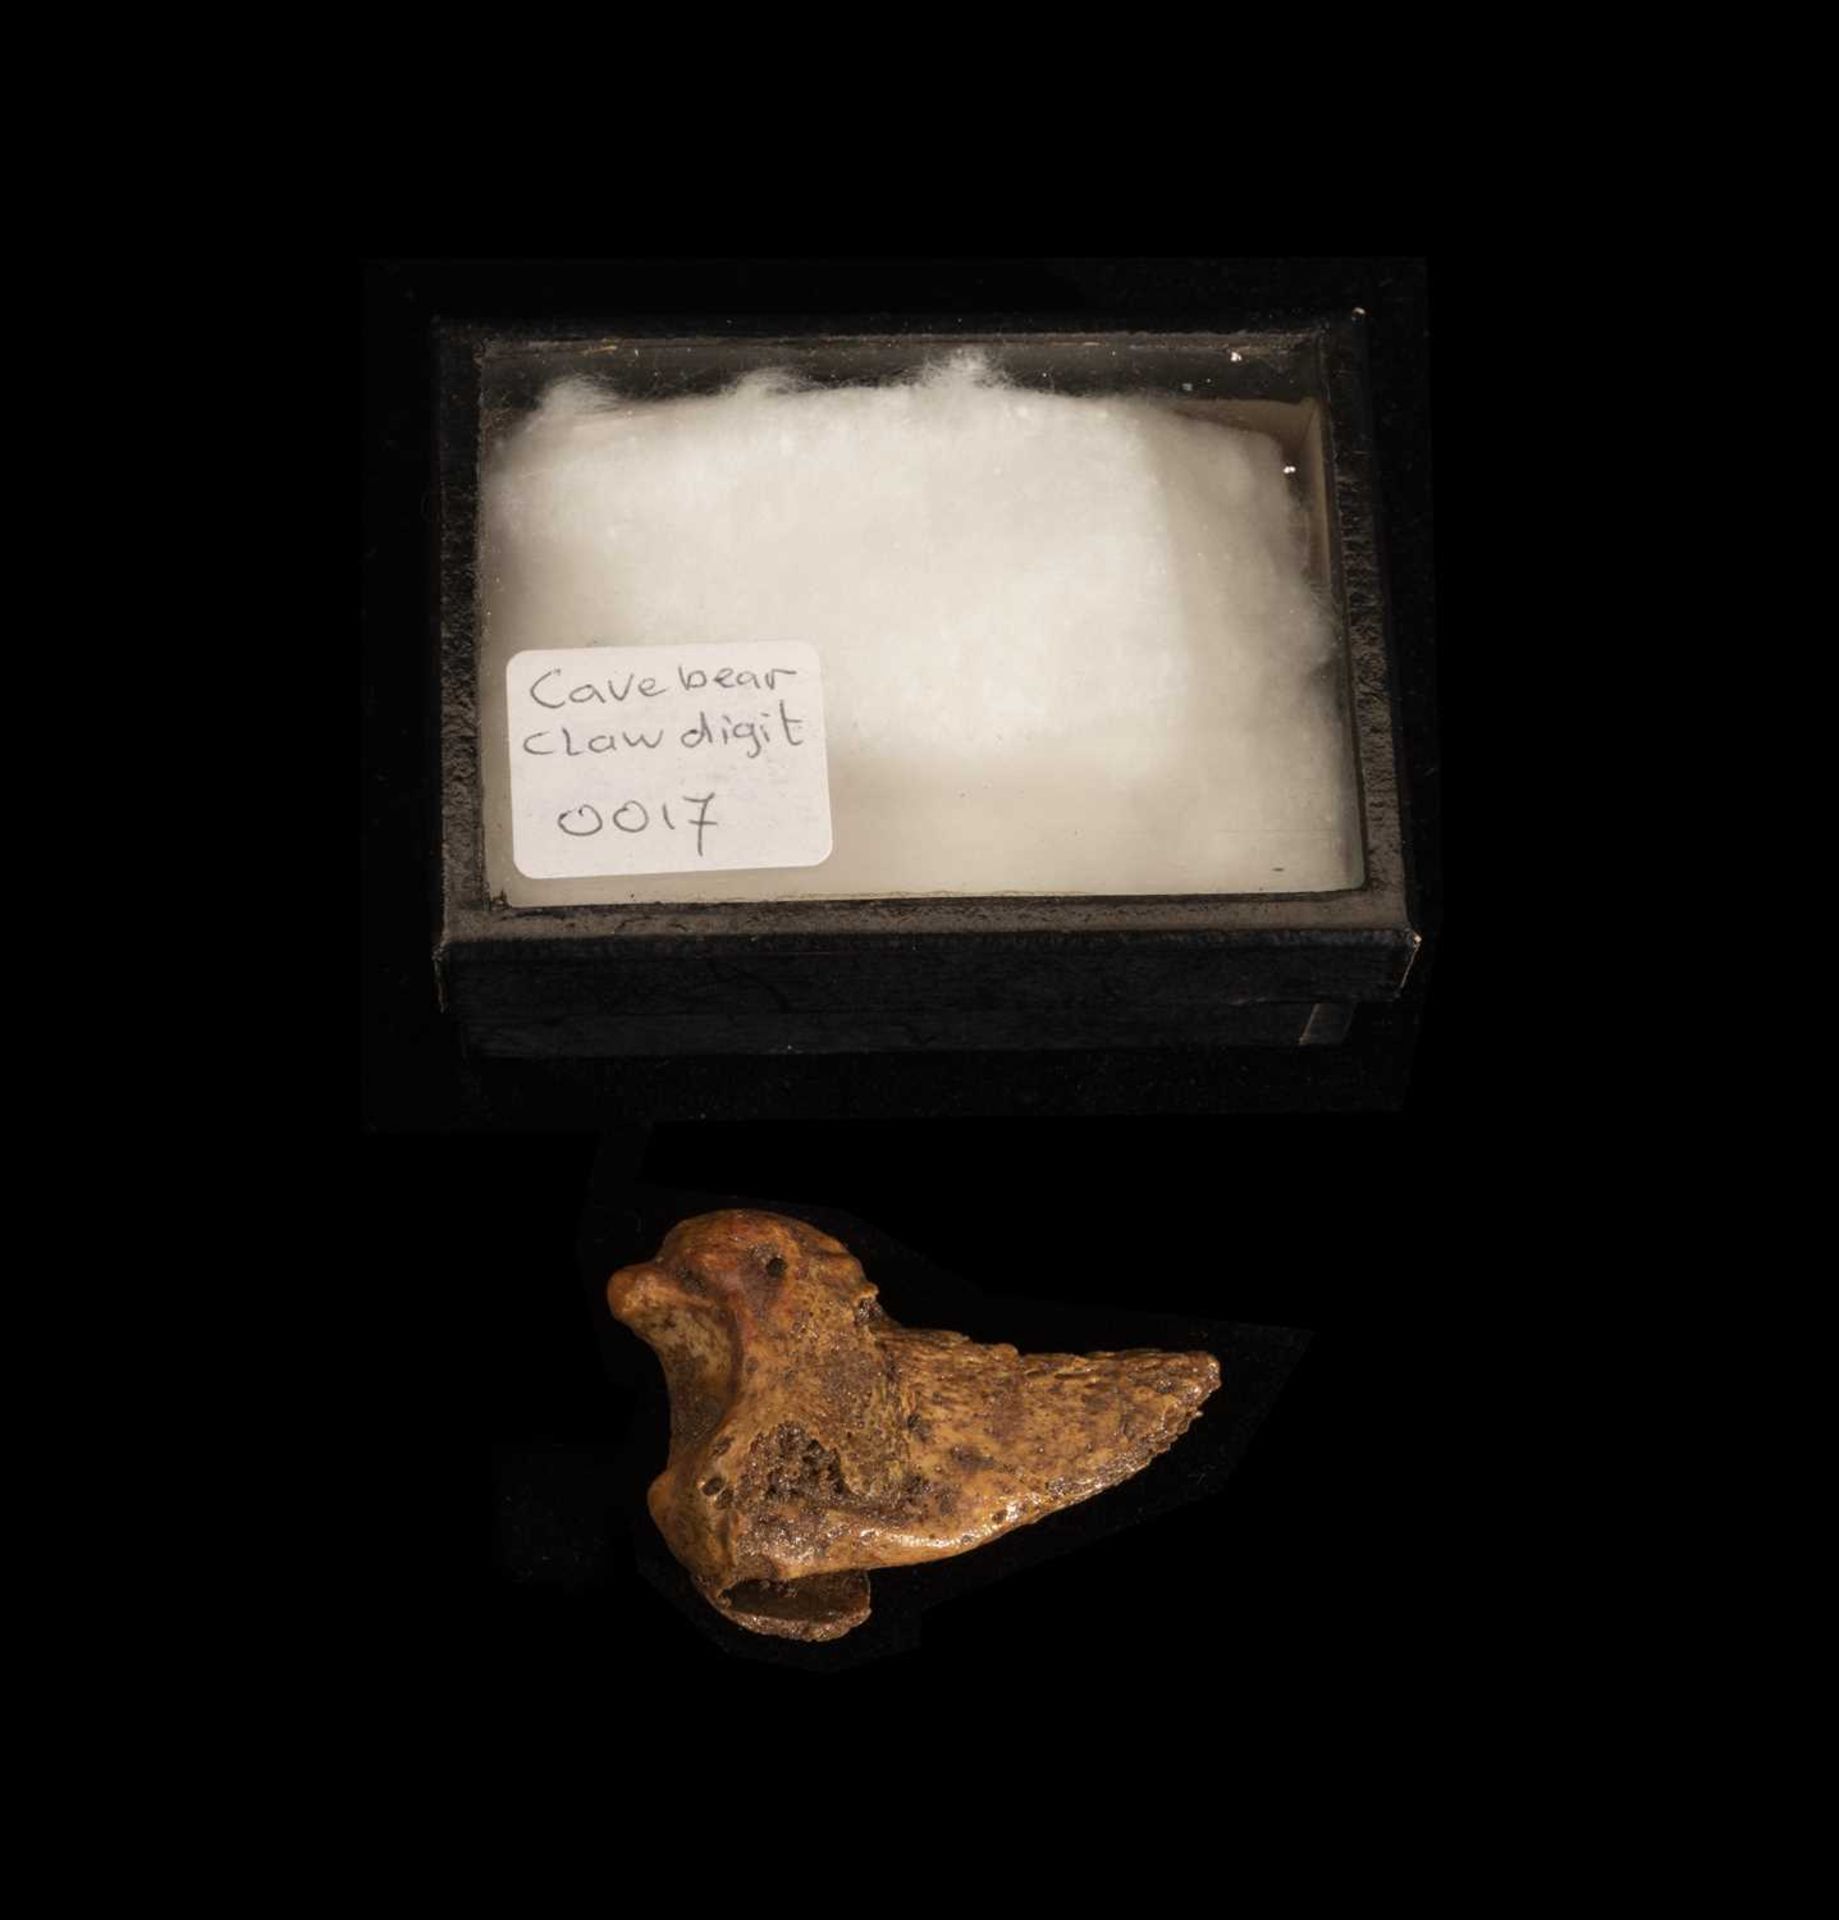 A FOSSILISED CLAW DIGIT FROM THE EXTINCT CAVE BEAR - Image 2 of 3